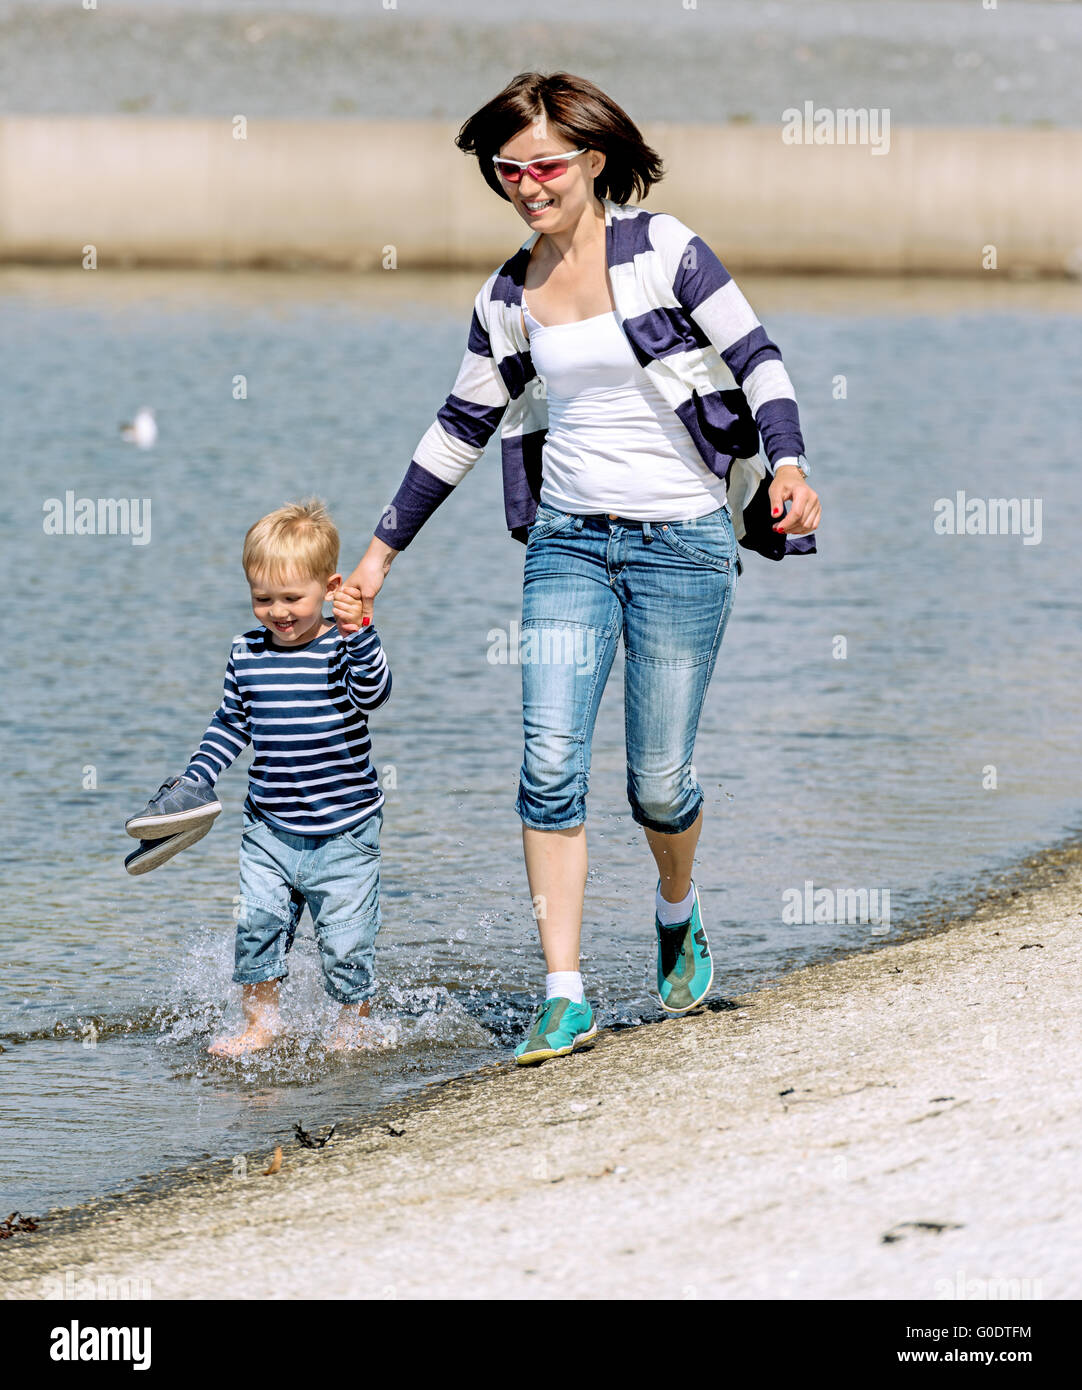 Lovely portrait of a mother and son outdoor at shore Stock Photo